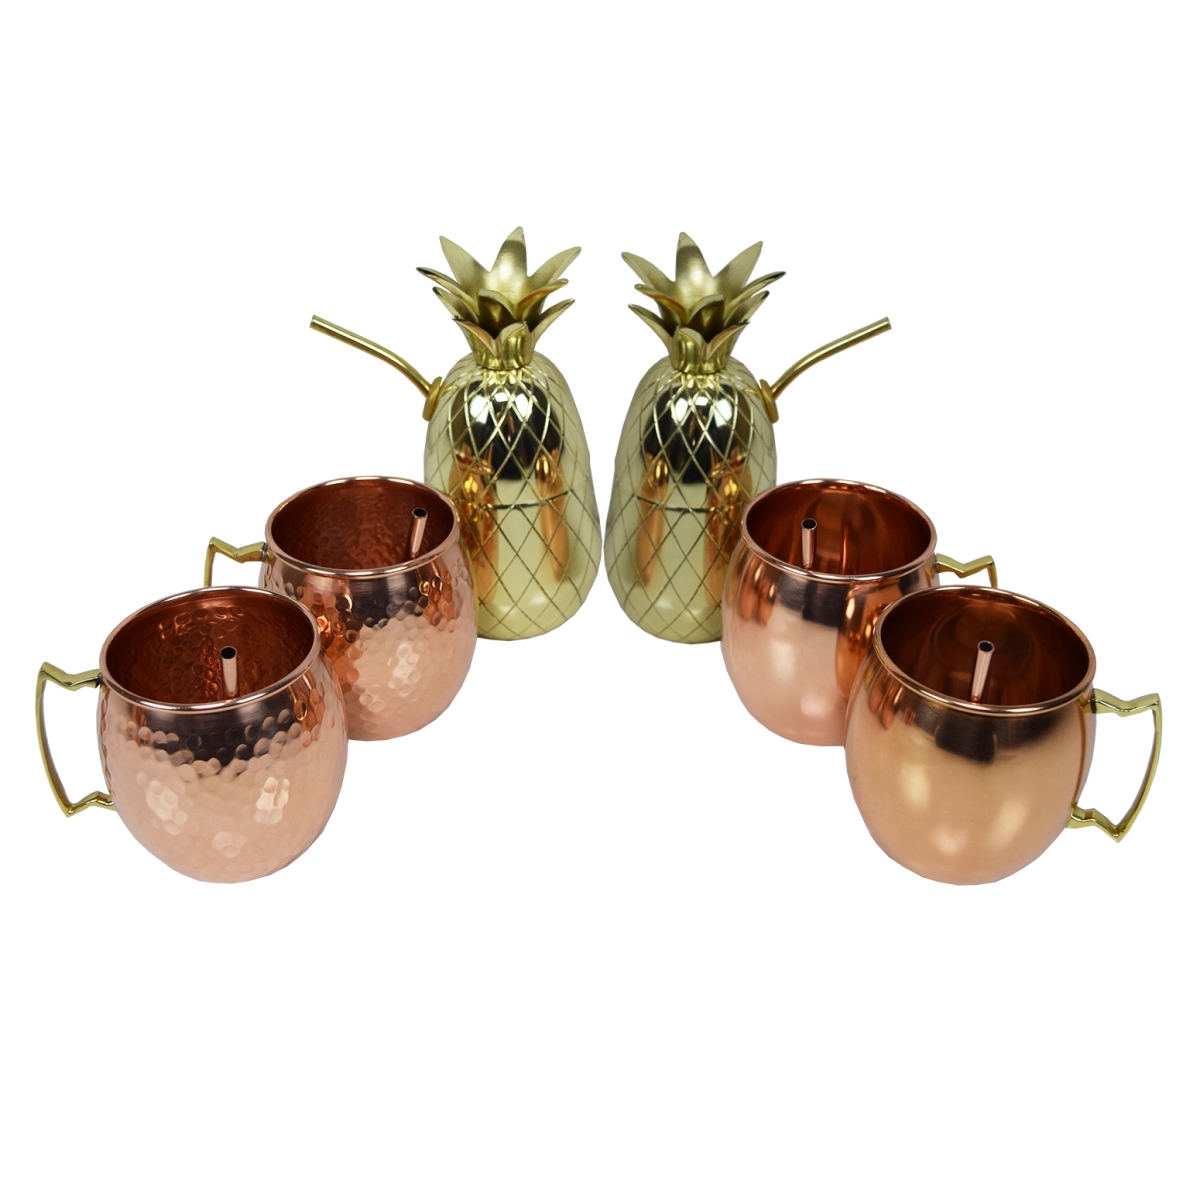 Oakland Living Zmug-ham-smooth-pine-6-co-gd 17 Oz 100 Percent Copper Moscow Mule Mug Cups & Two 16 Oz Brass Pineapple Cup Shakers - 6 Piece